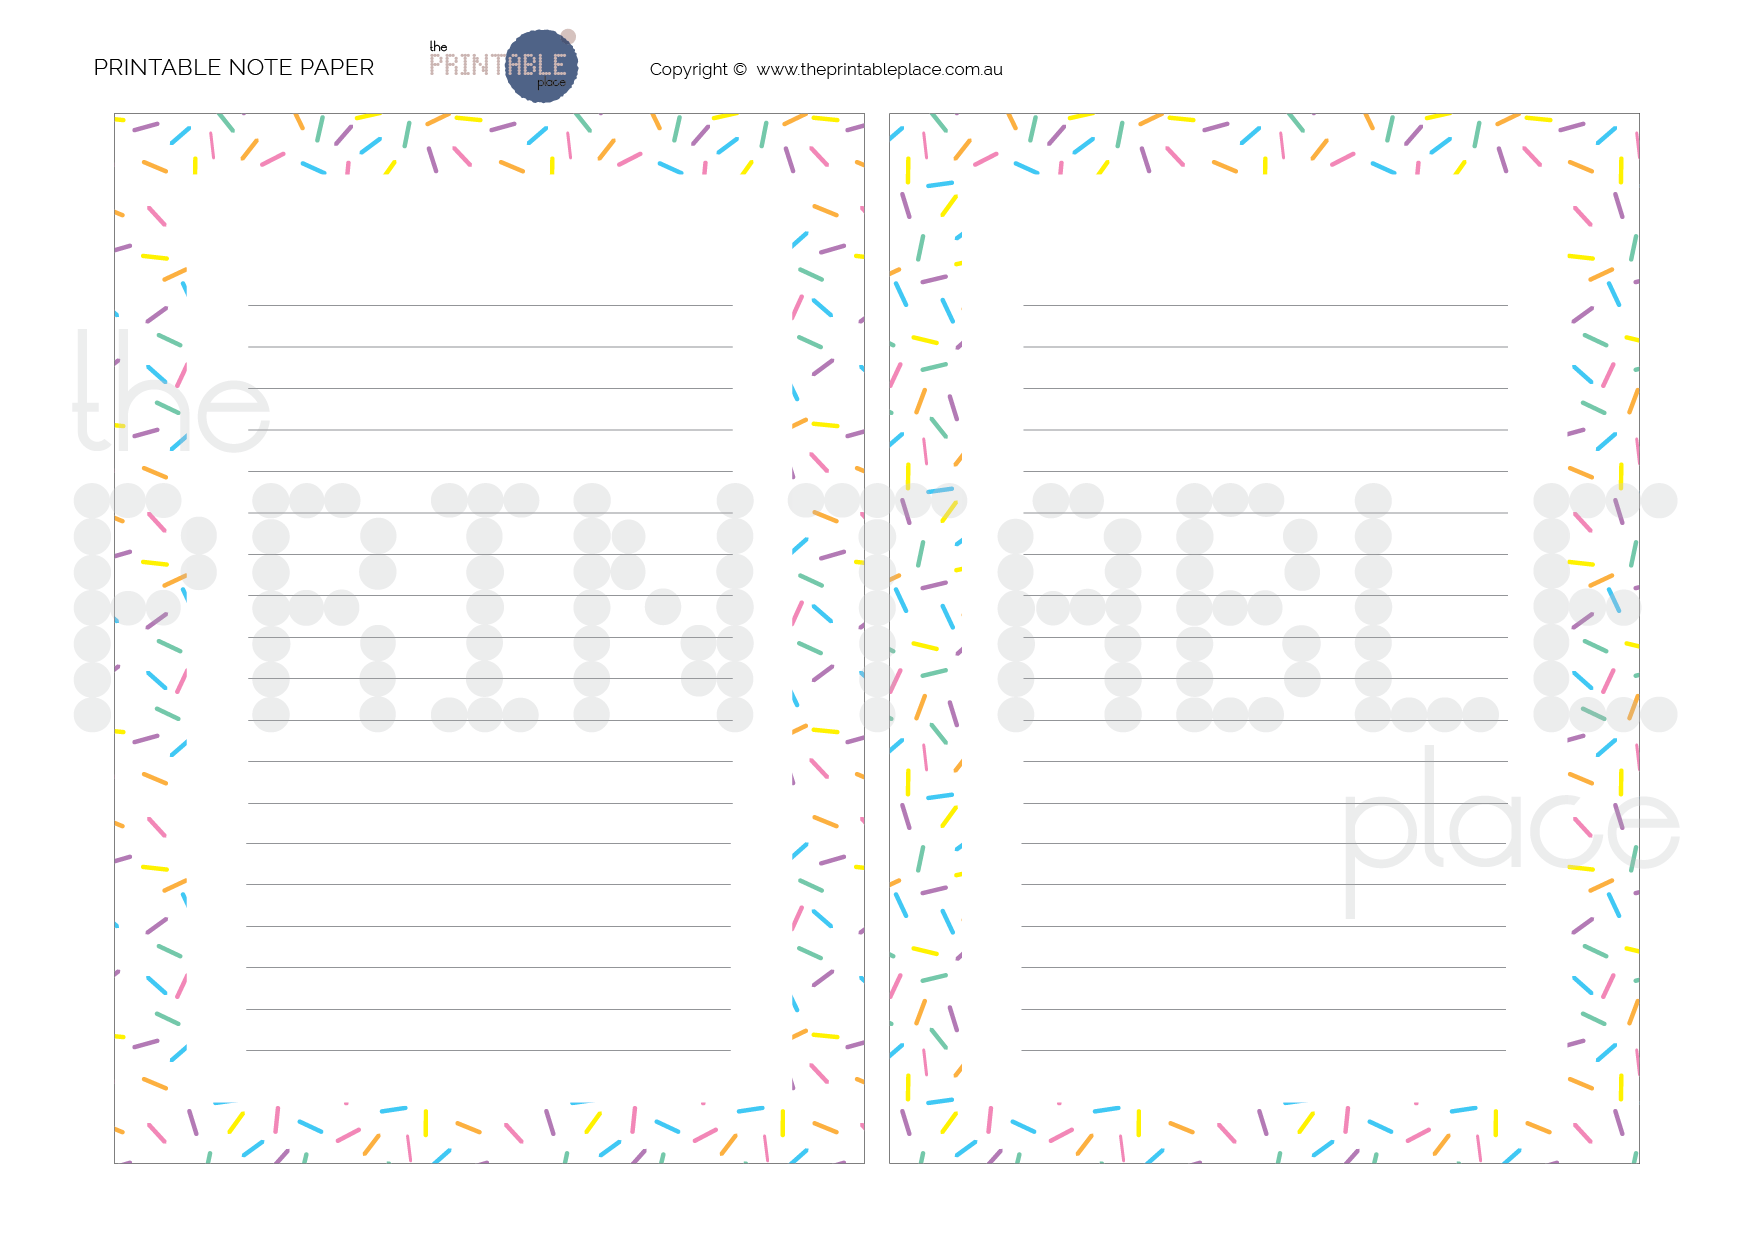 Sprinkles On Top Printable Note Paper-the-printable-place.myshopify.com-Note Paper